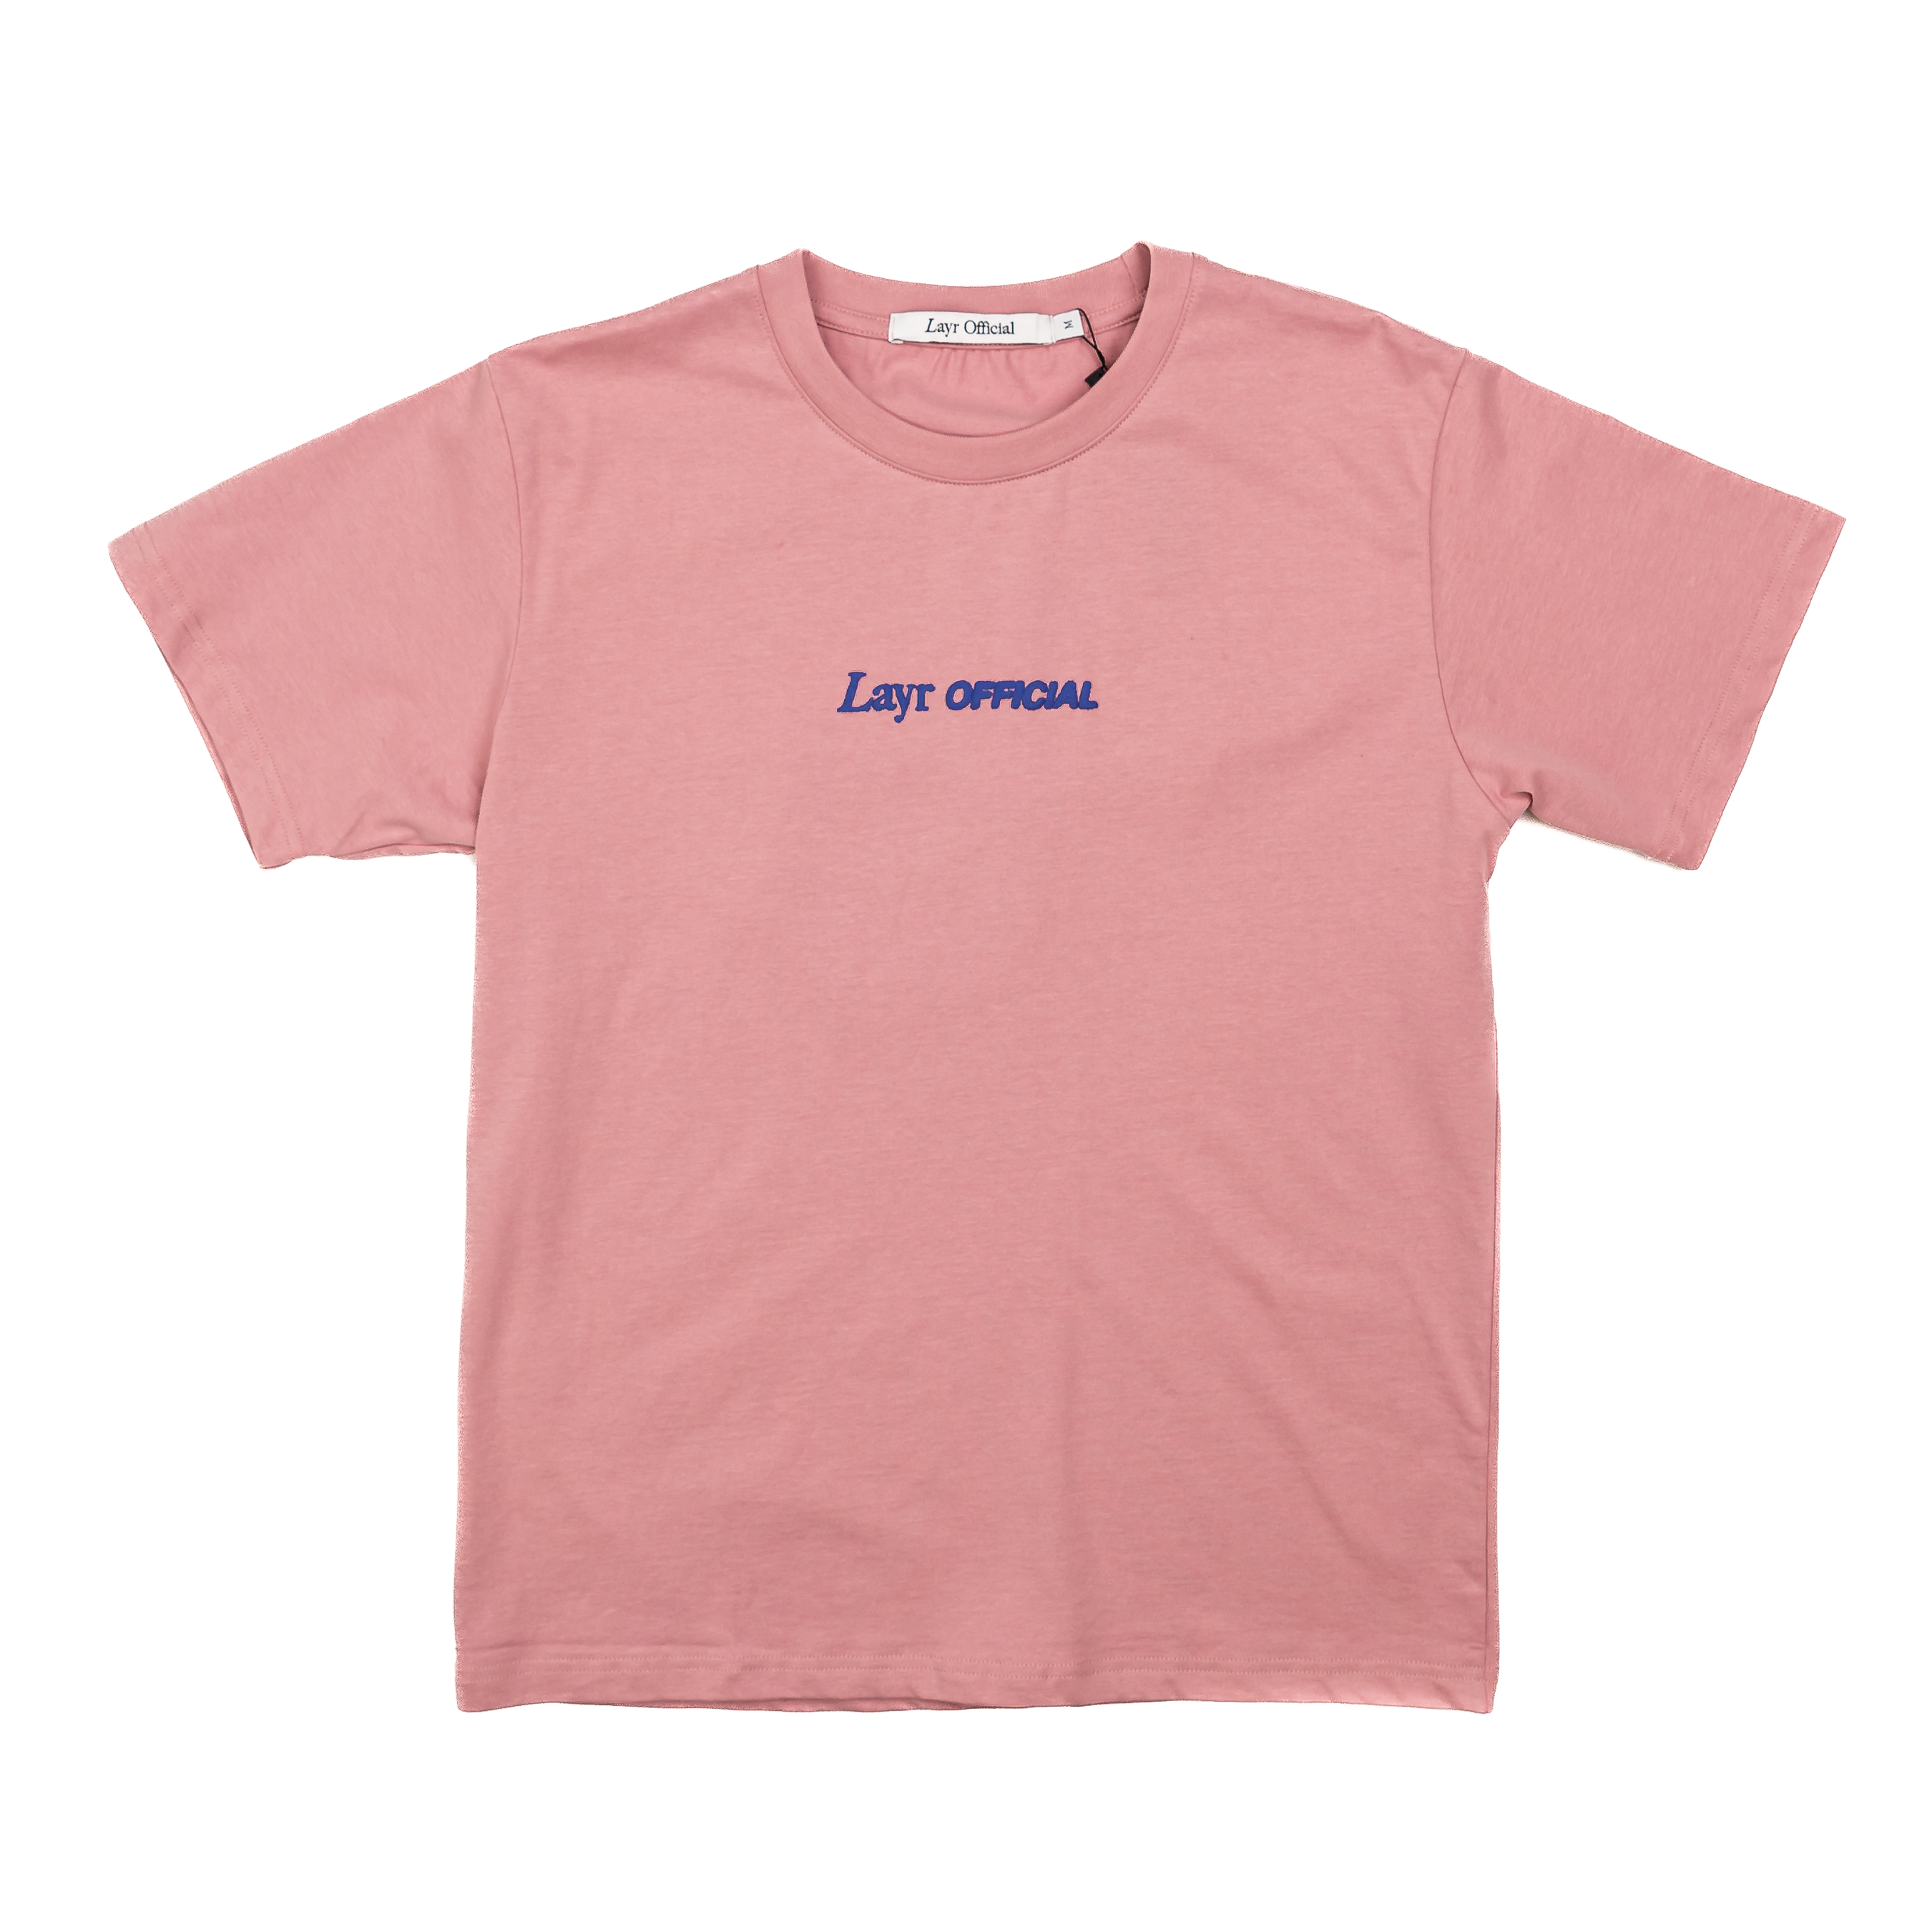 New LO Puff Tee, Washed Pink – Layr Official